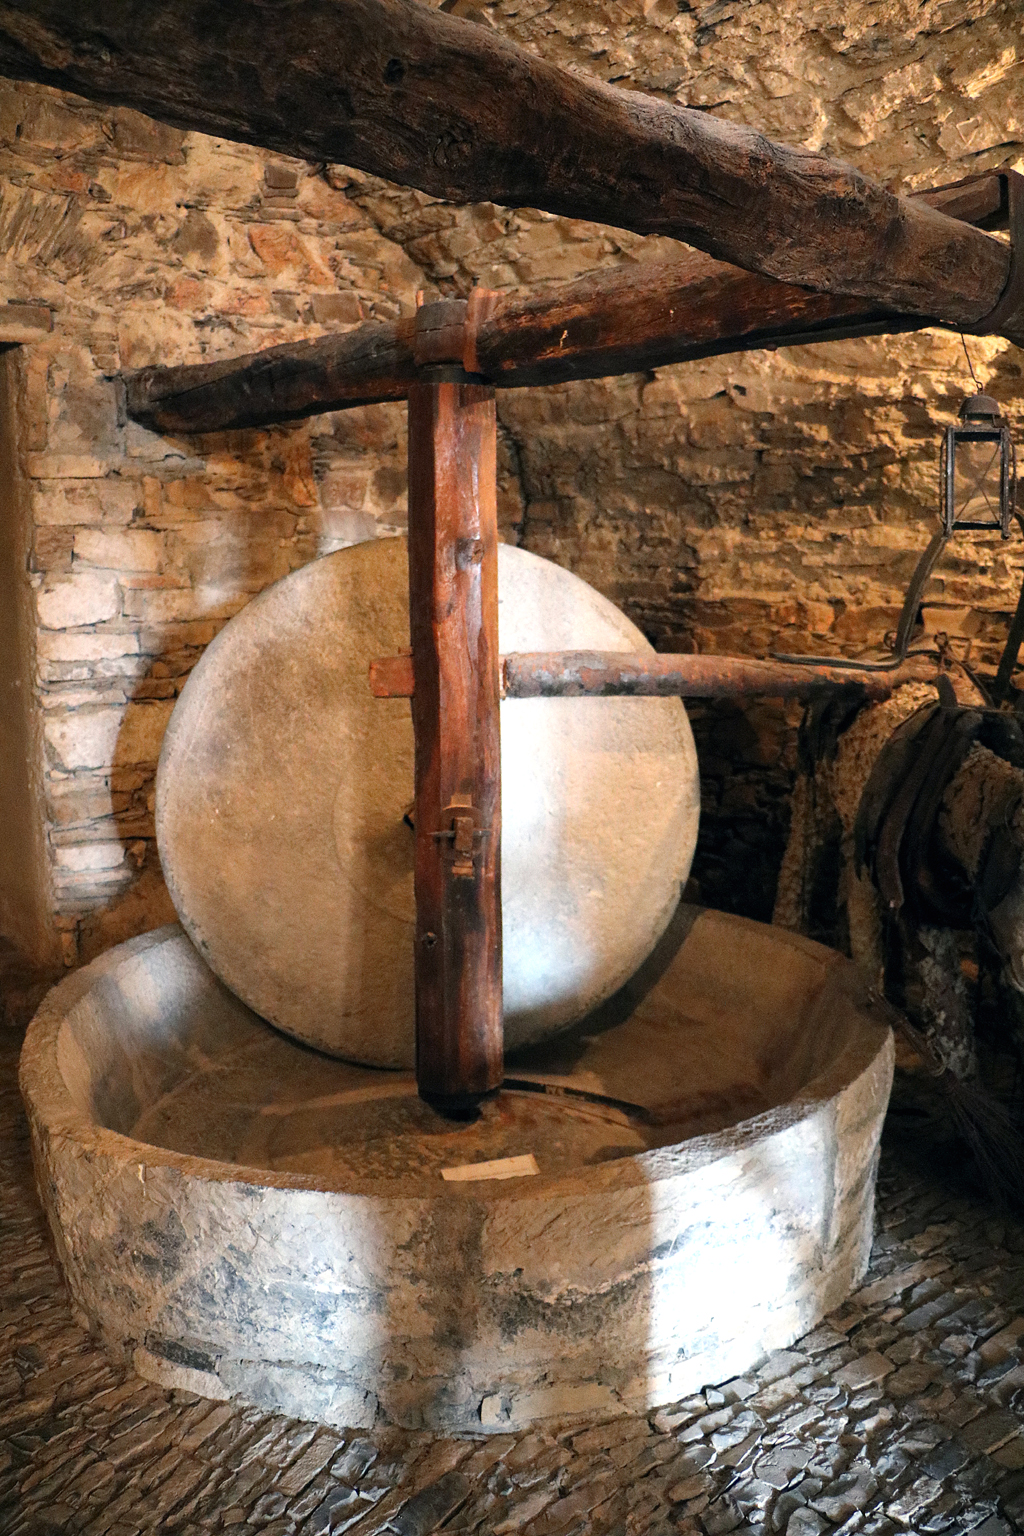 The ancient olive oil production is on display in The Etnographic Section